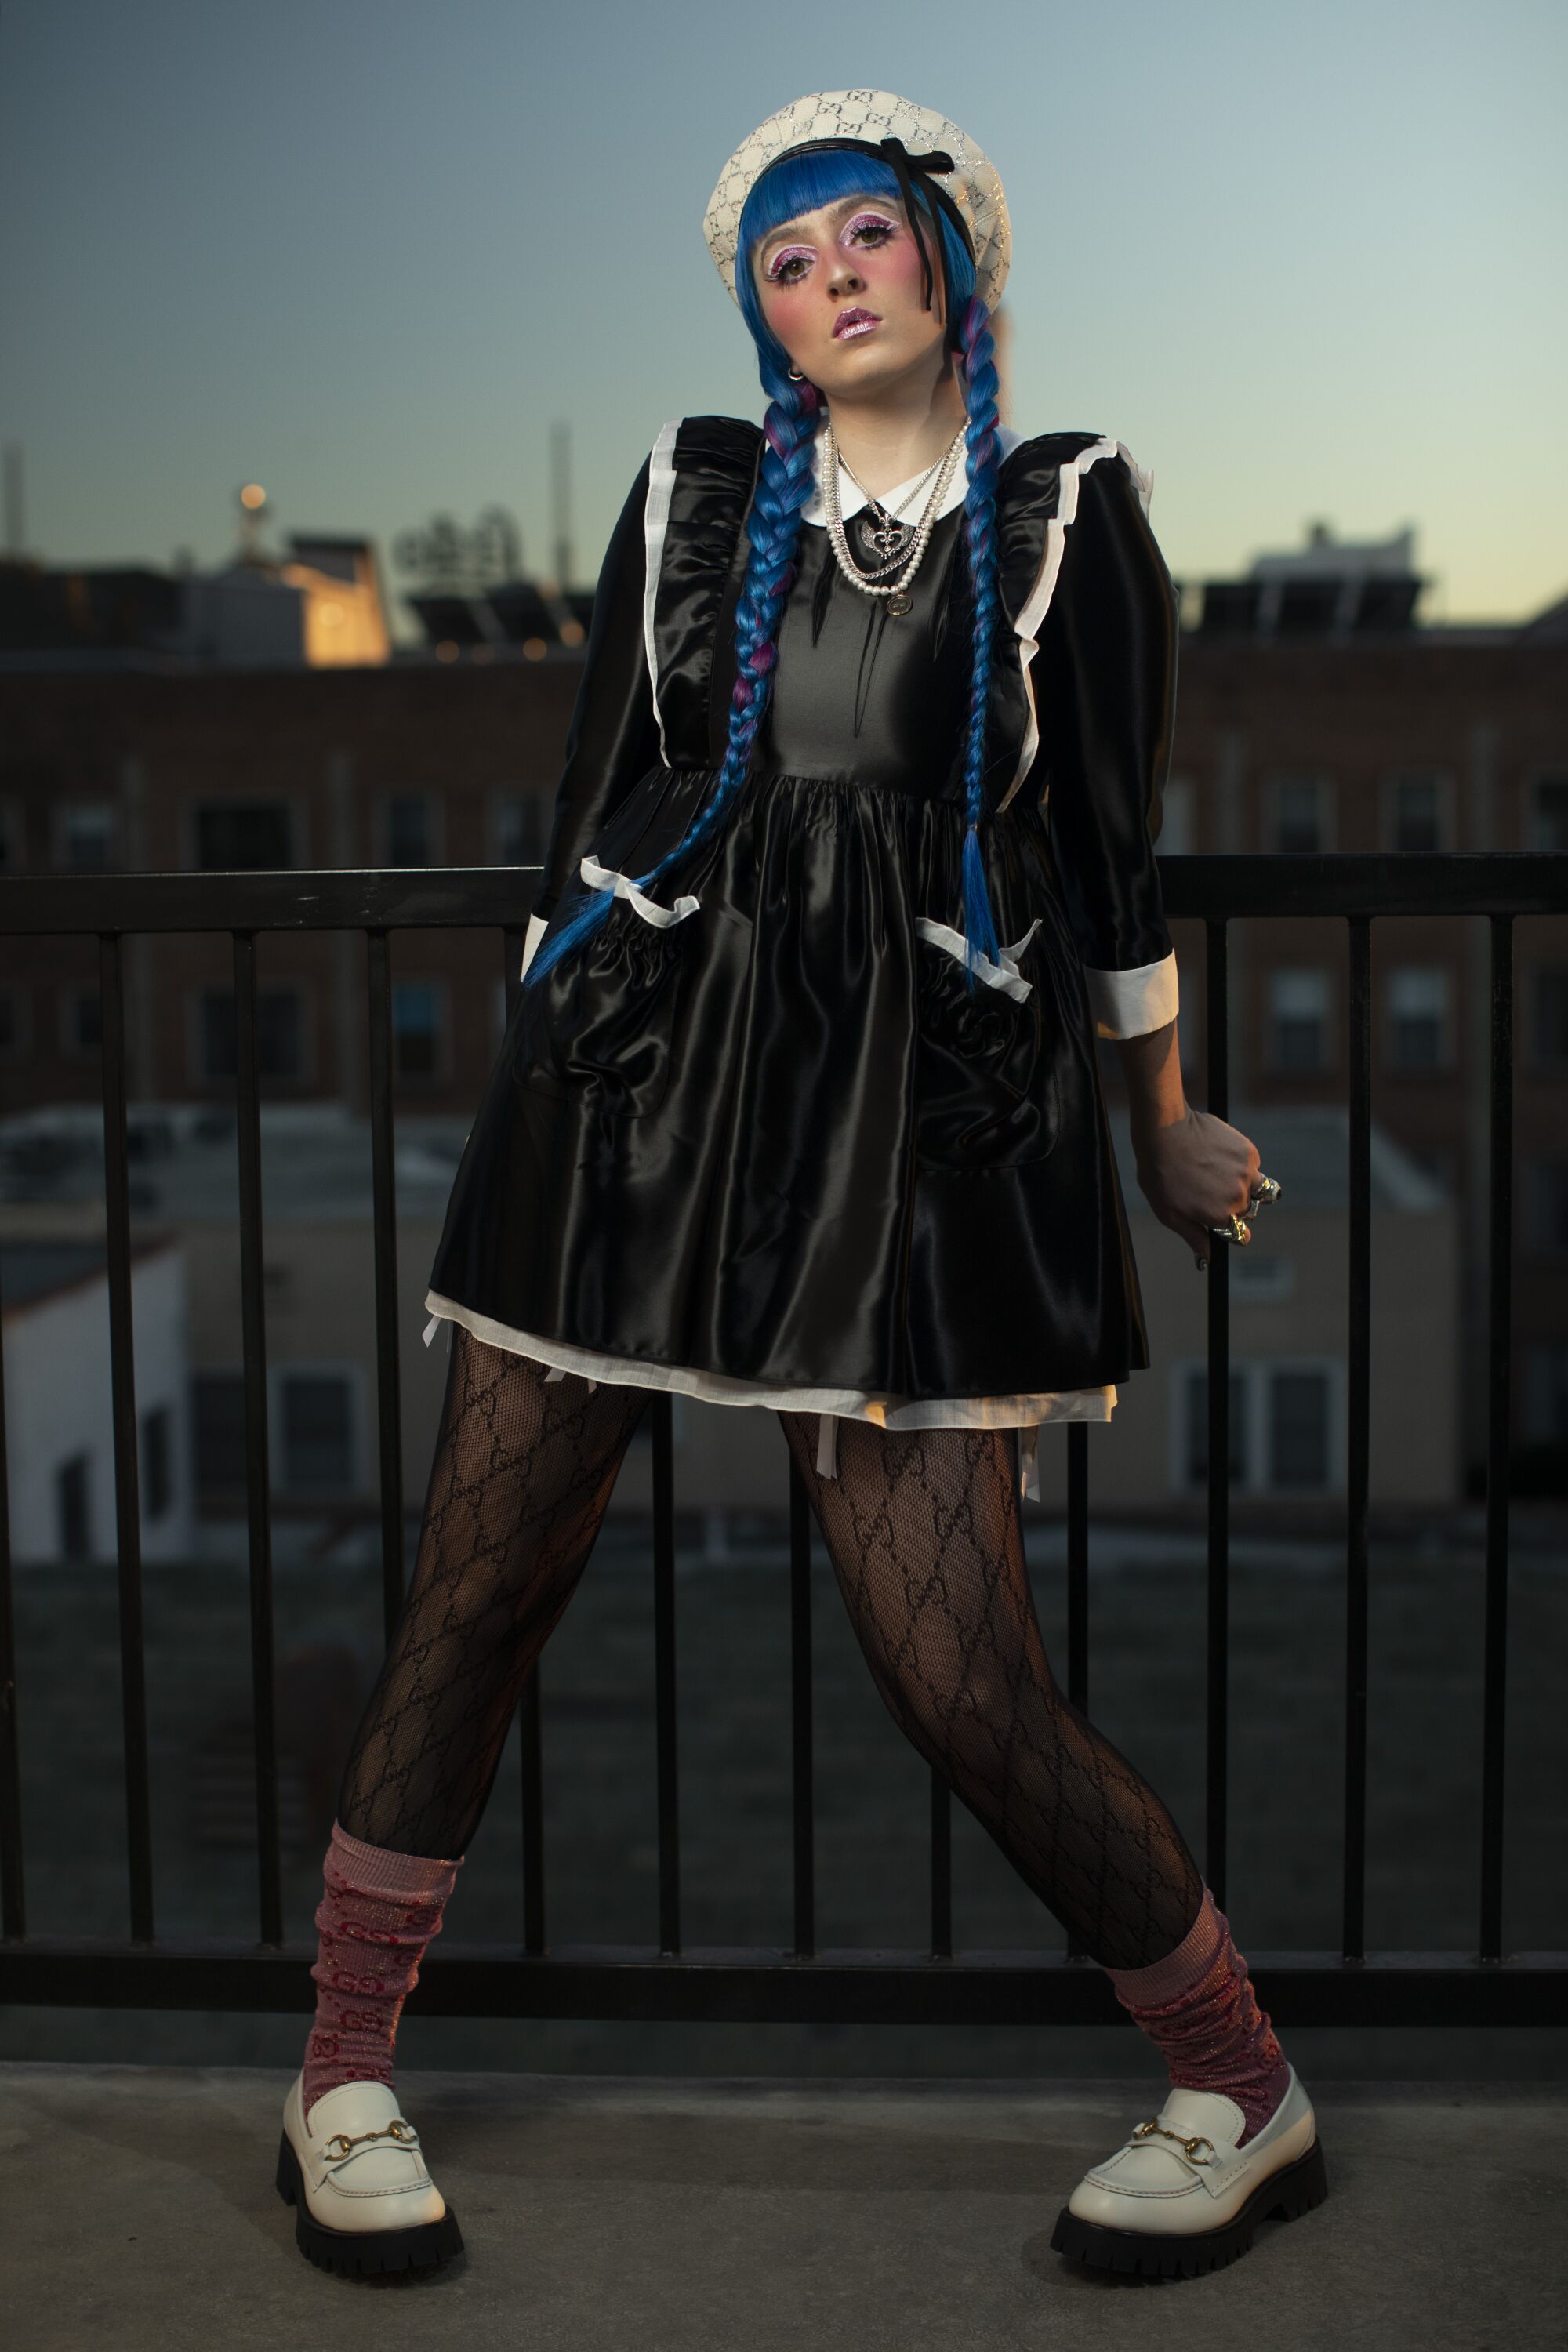 Jan. 14: American rapper Ashnikko, 24, in blue braids, a white cap and a short black silky dress and stockings